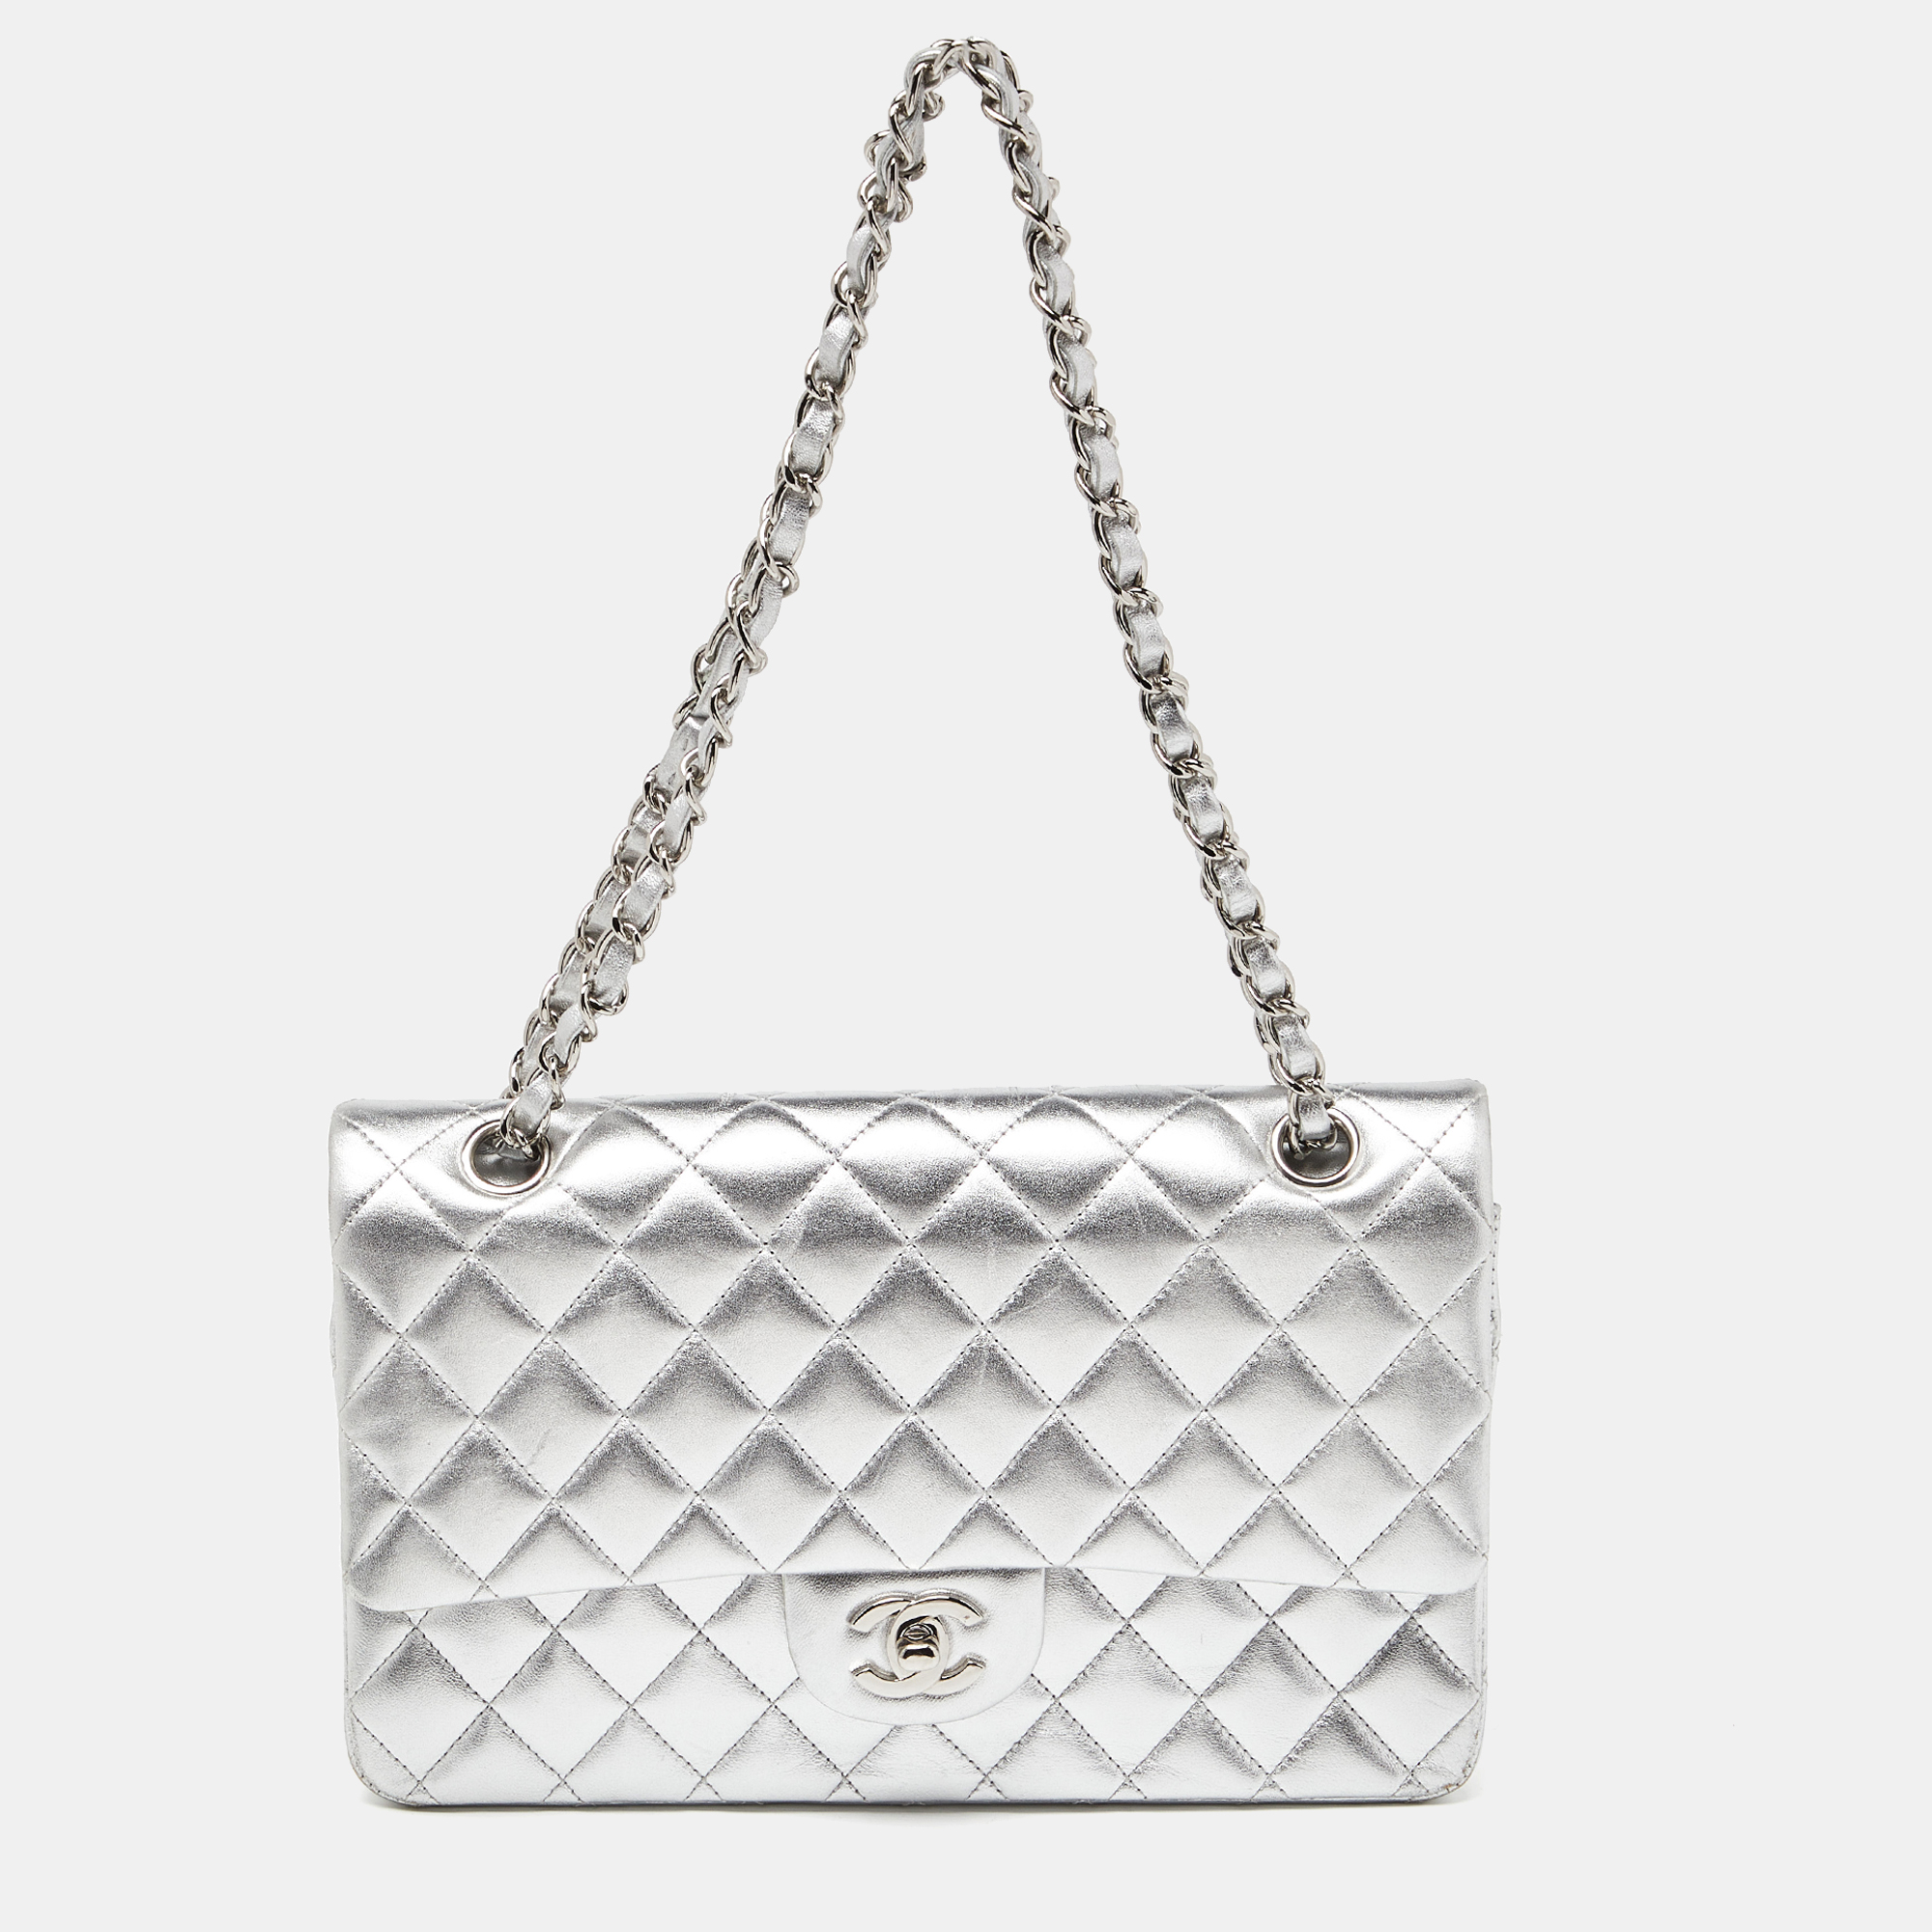 Chanel silver quilted leather medium classic double flap bag